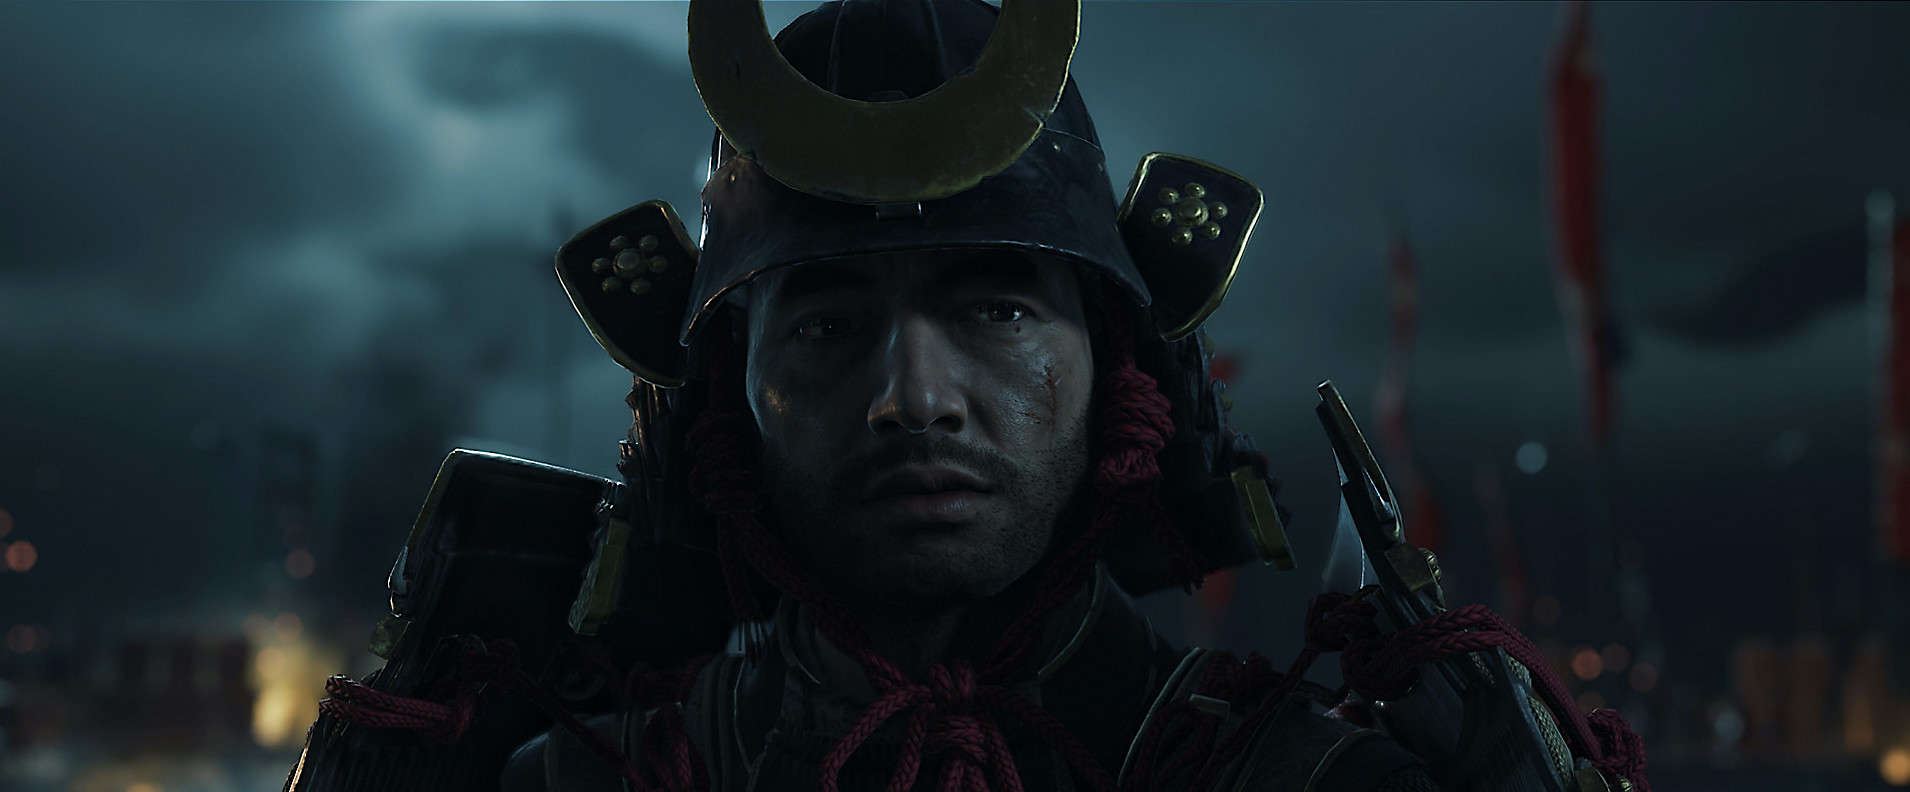 Ghost of Tsushima 2 Possibly Teased in New PS5 Ad